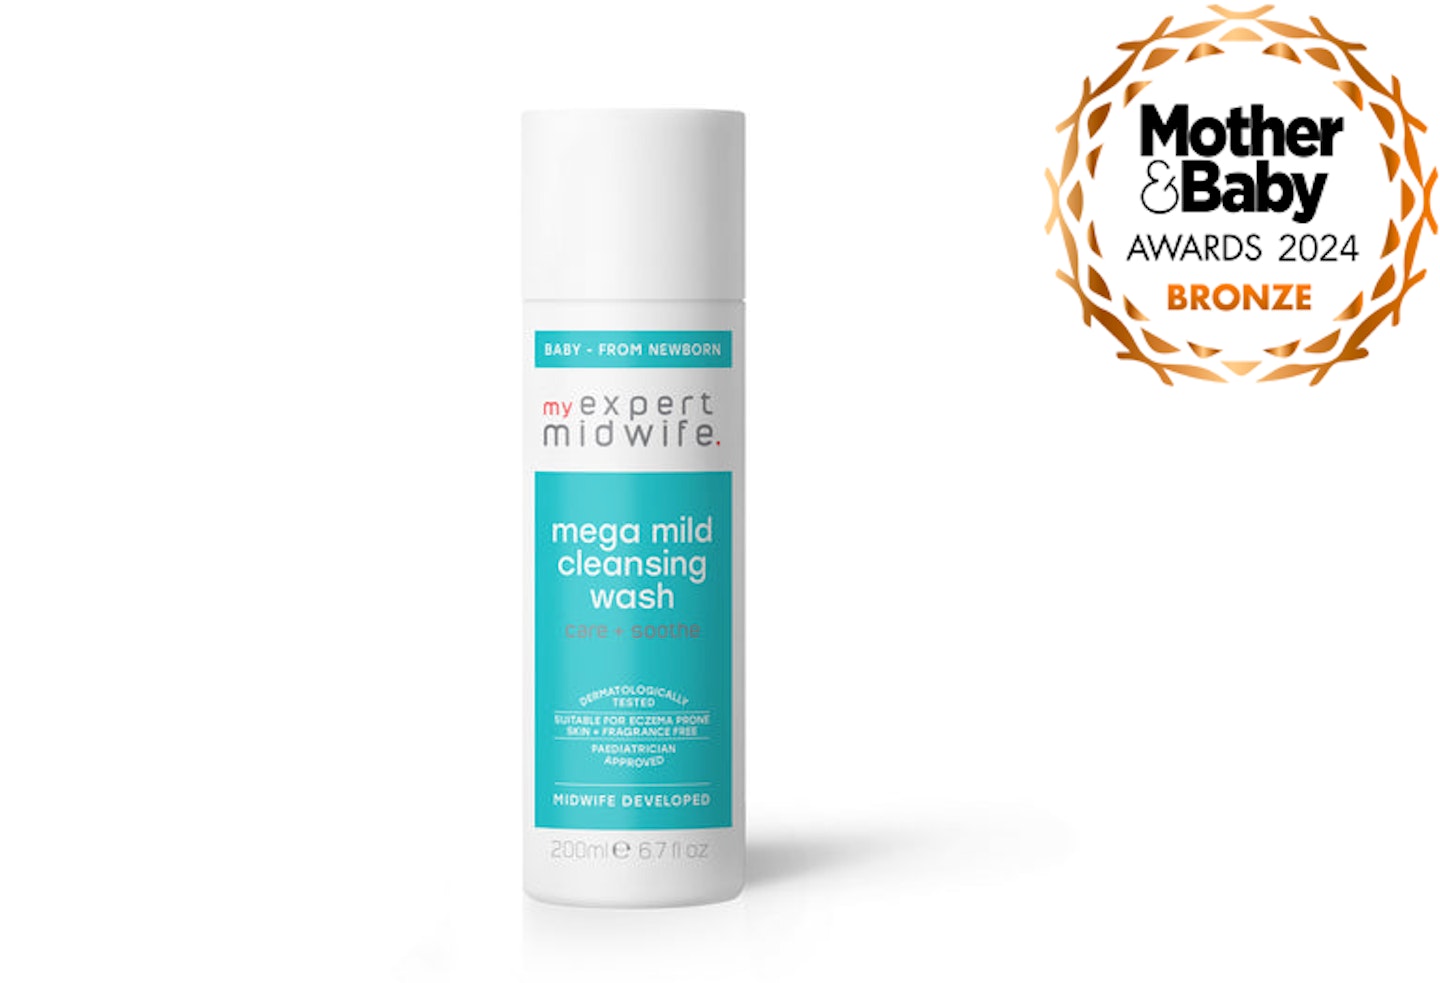 My Expert Midwife Mega Mild Cleansing Wash